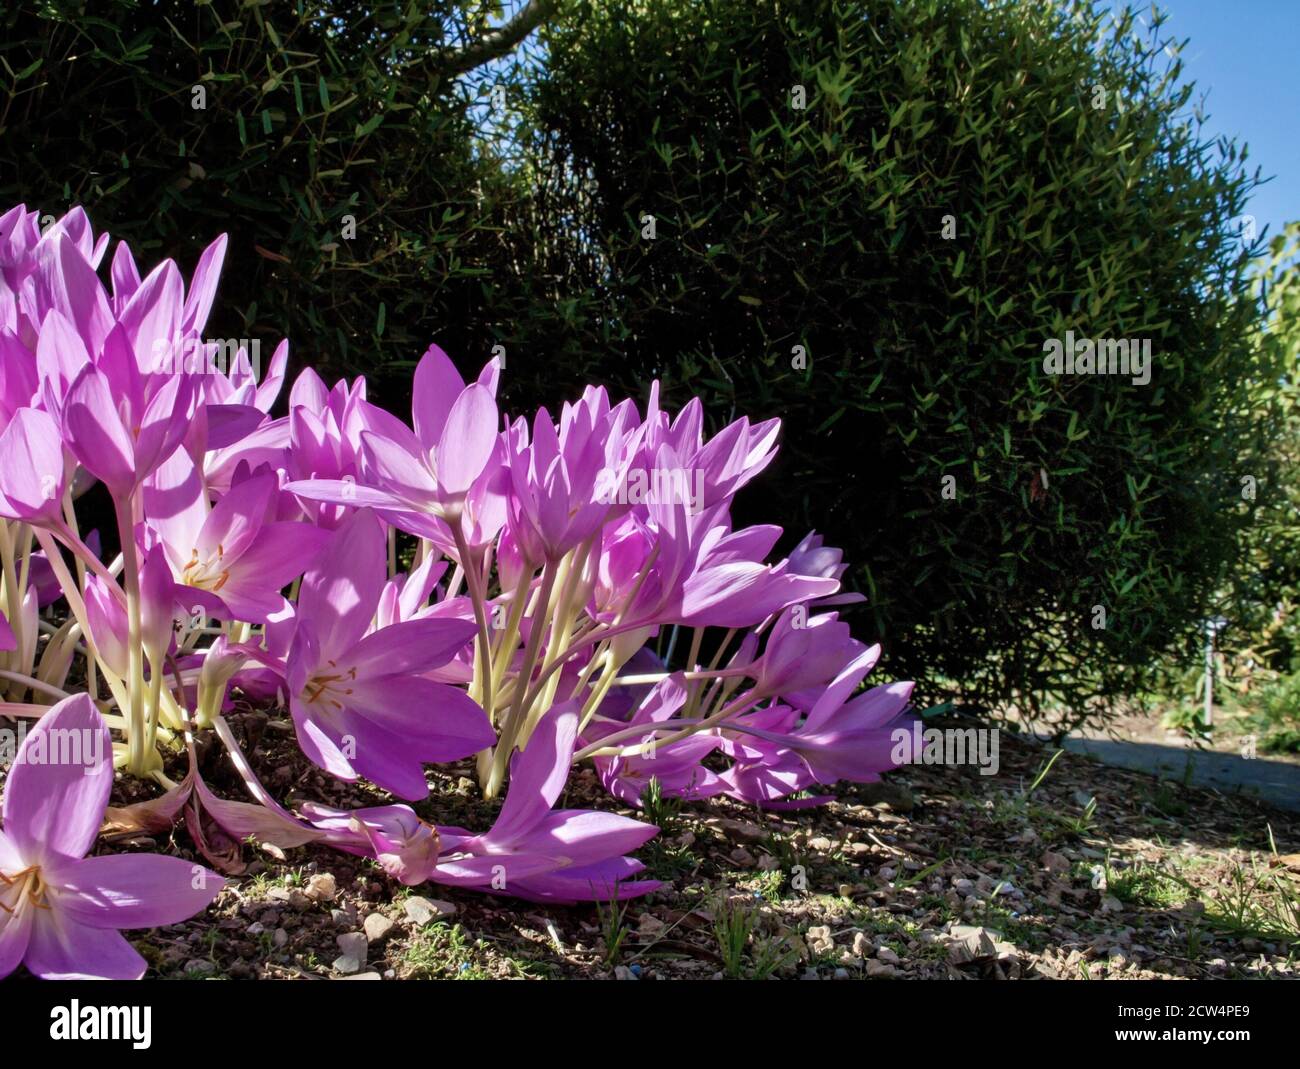 Autumn at Garden House in Devon. Beautiful autumn crocus a delicate lilac with golden stamen taken from a ground level close up viewpoint. Flowers app Stock Photo